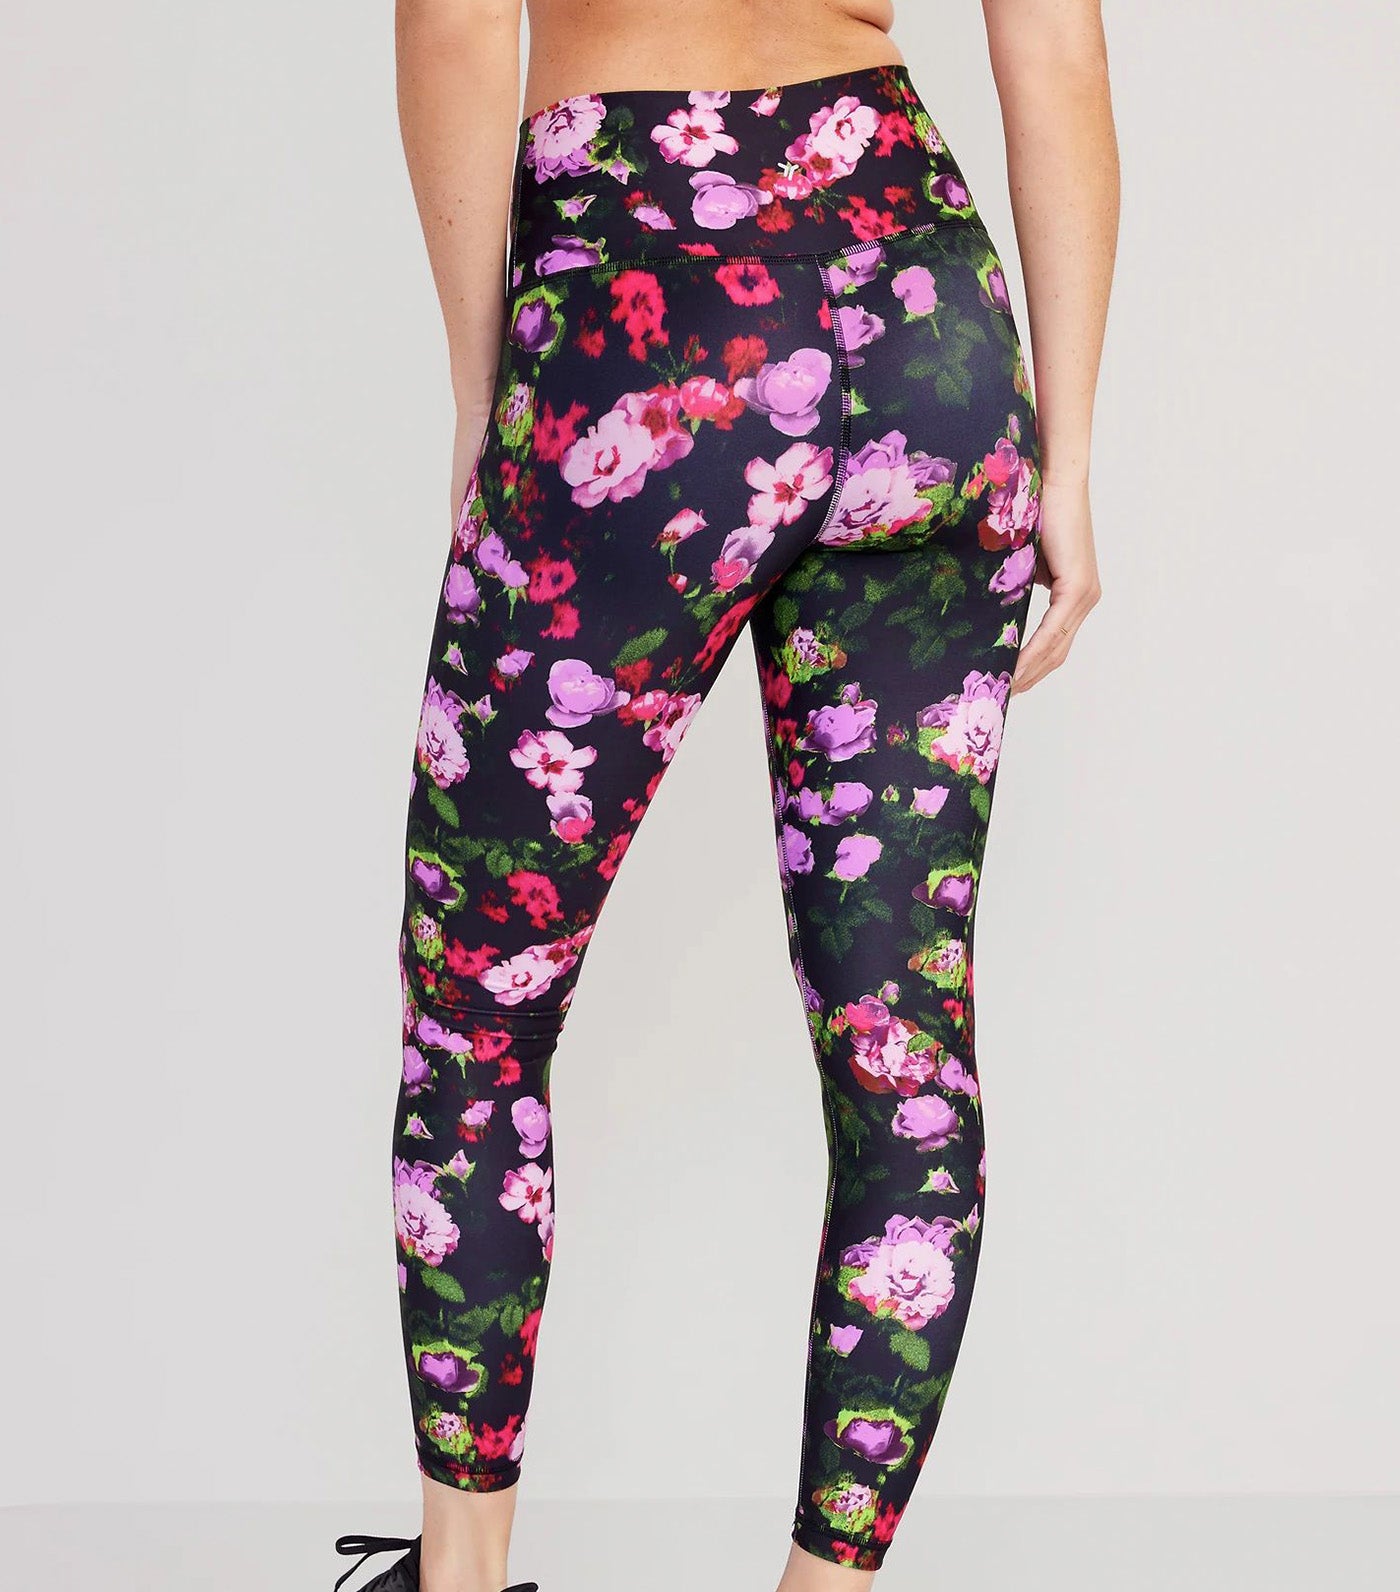 High-Waisted PowerSoft 7/8-Length Leggings for Women Purple Floral